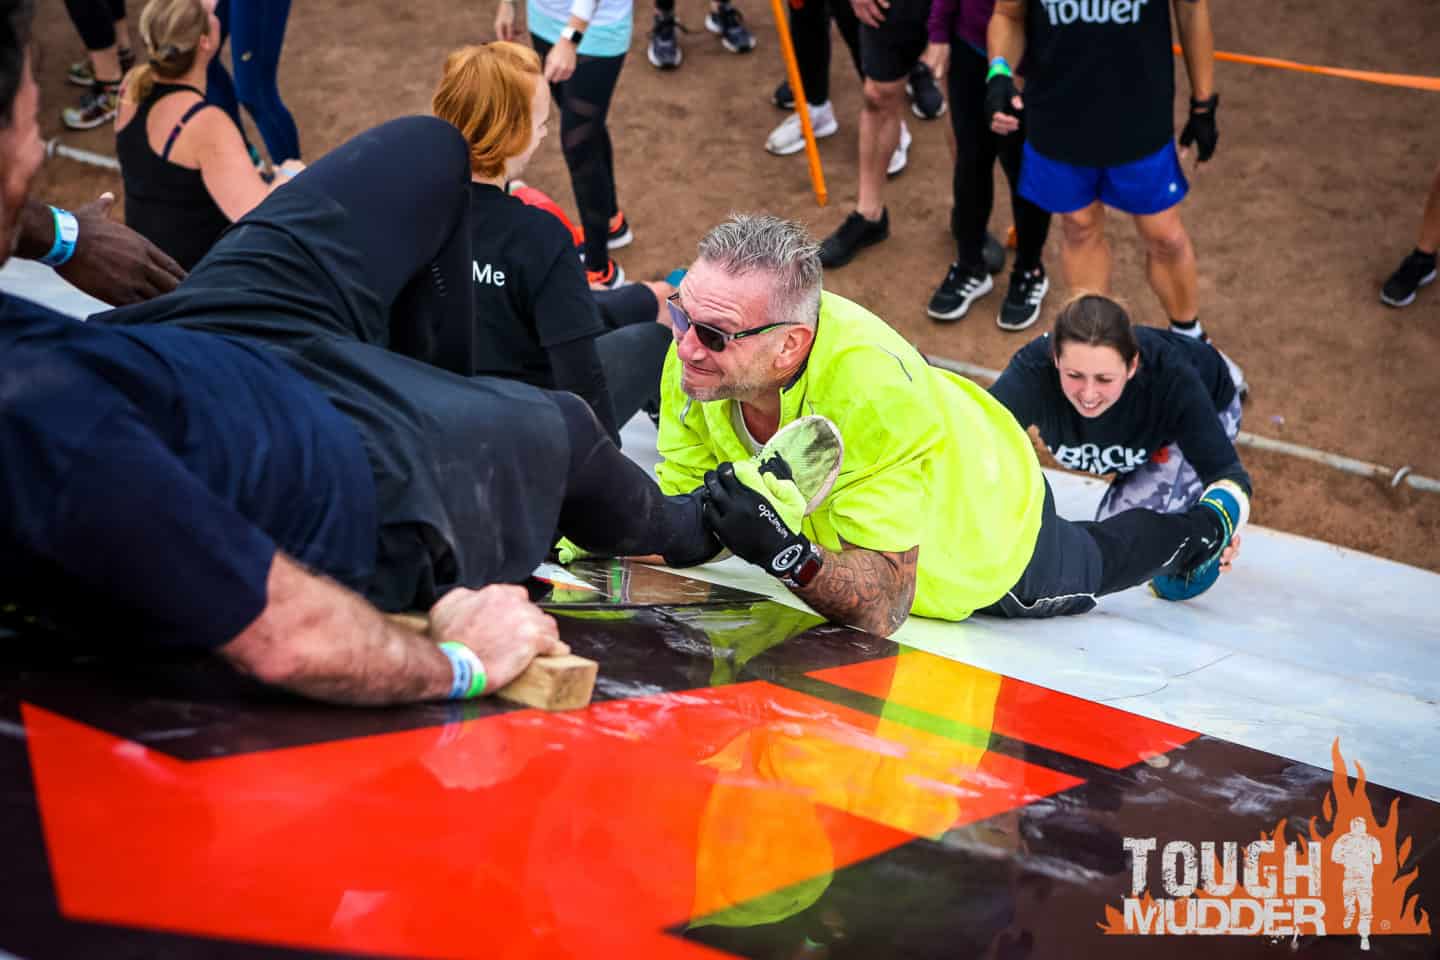 People helping each other up a high, sloping wall during a Tough Mudder event